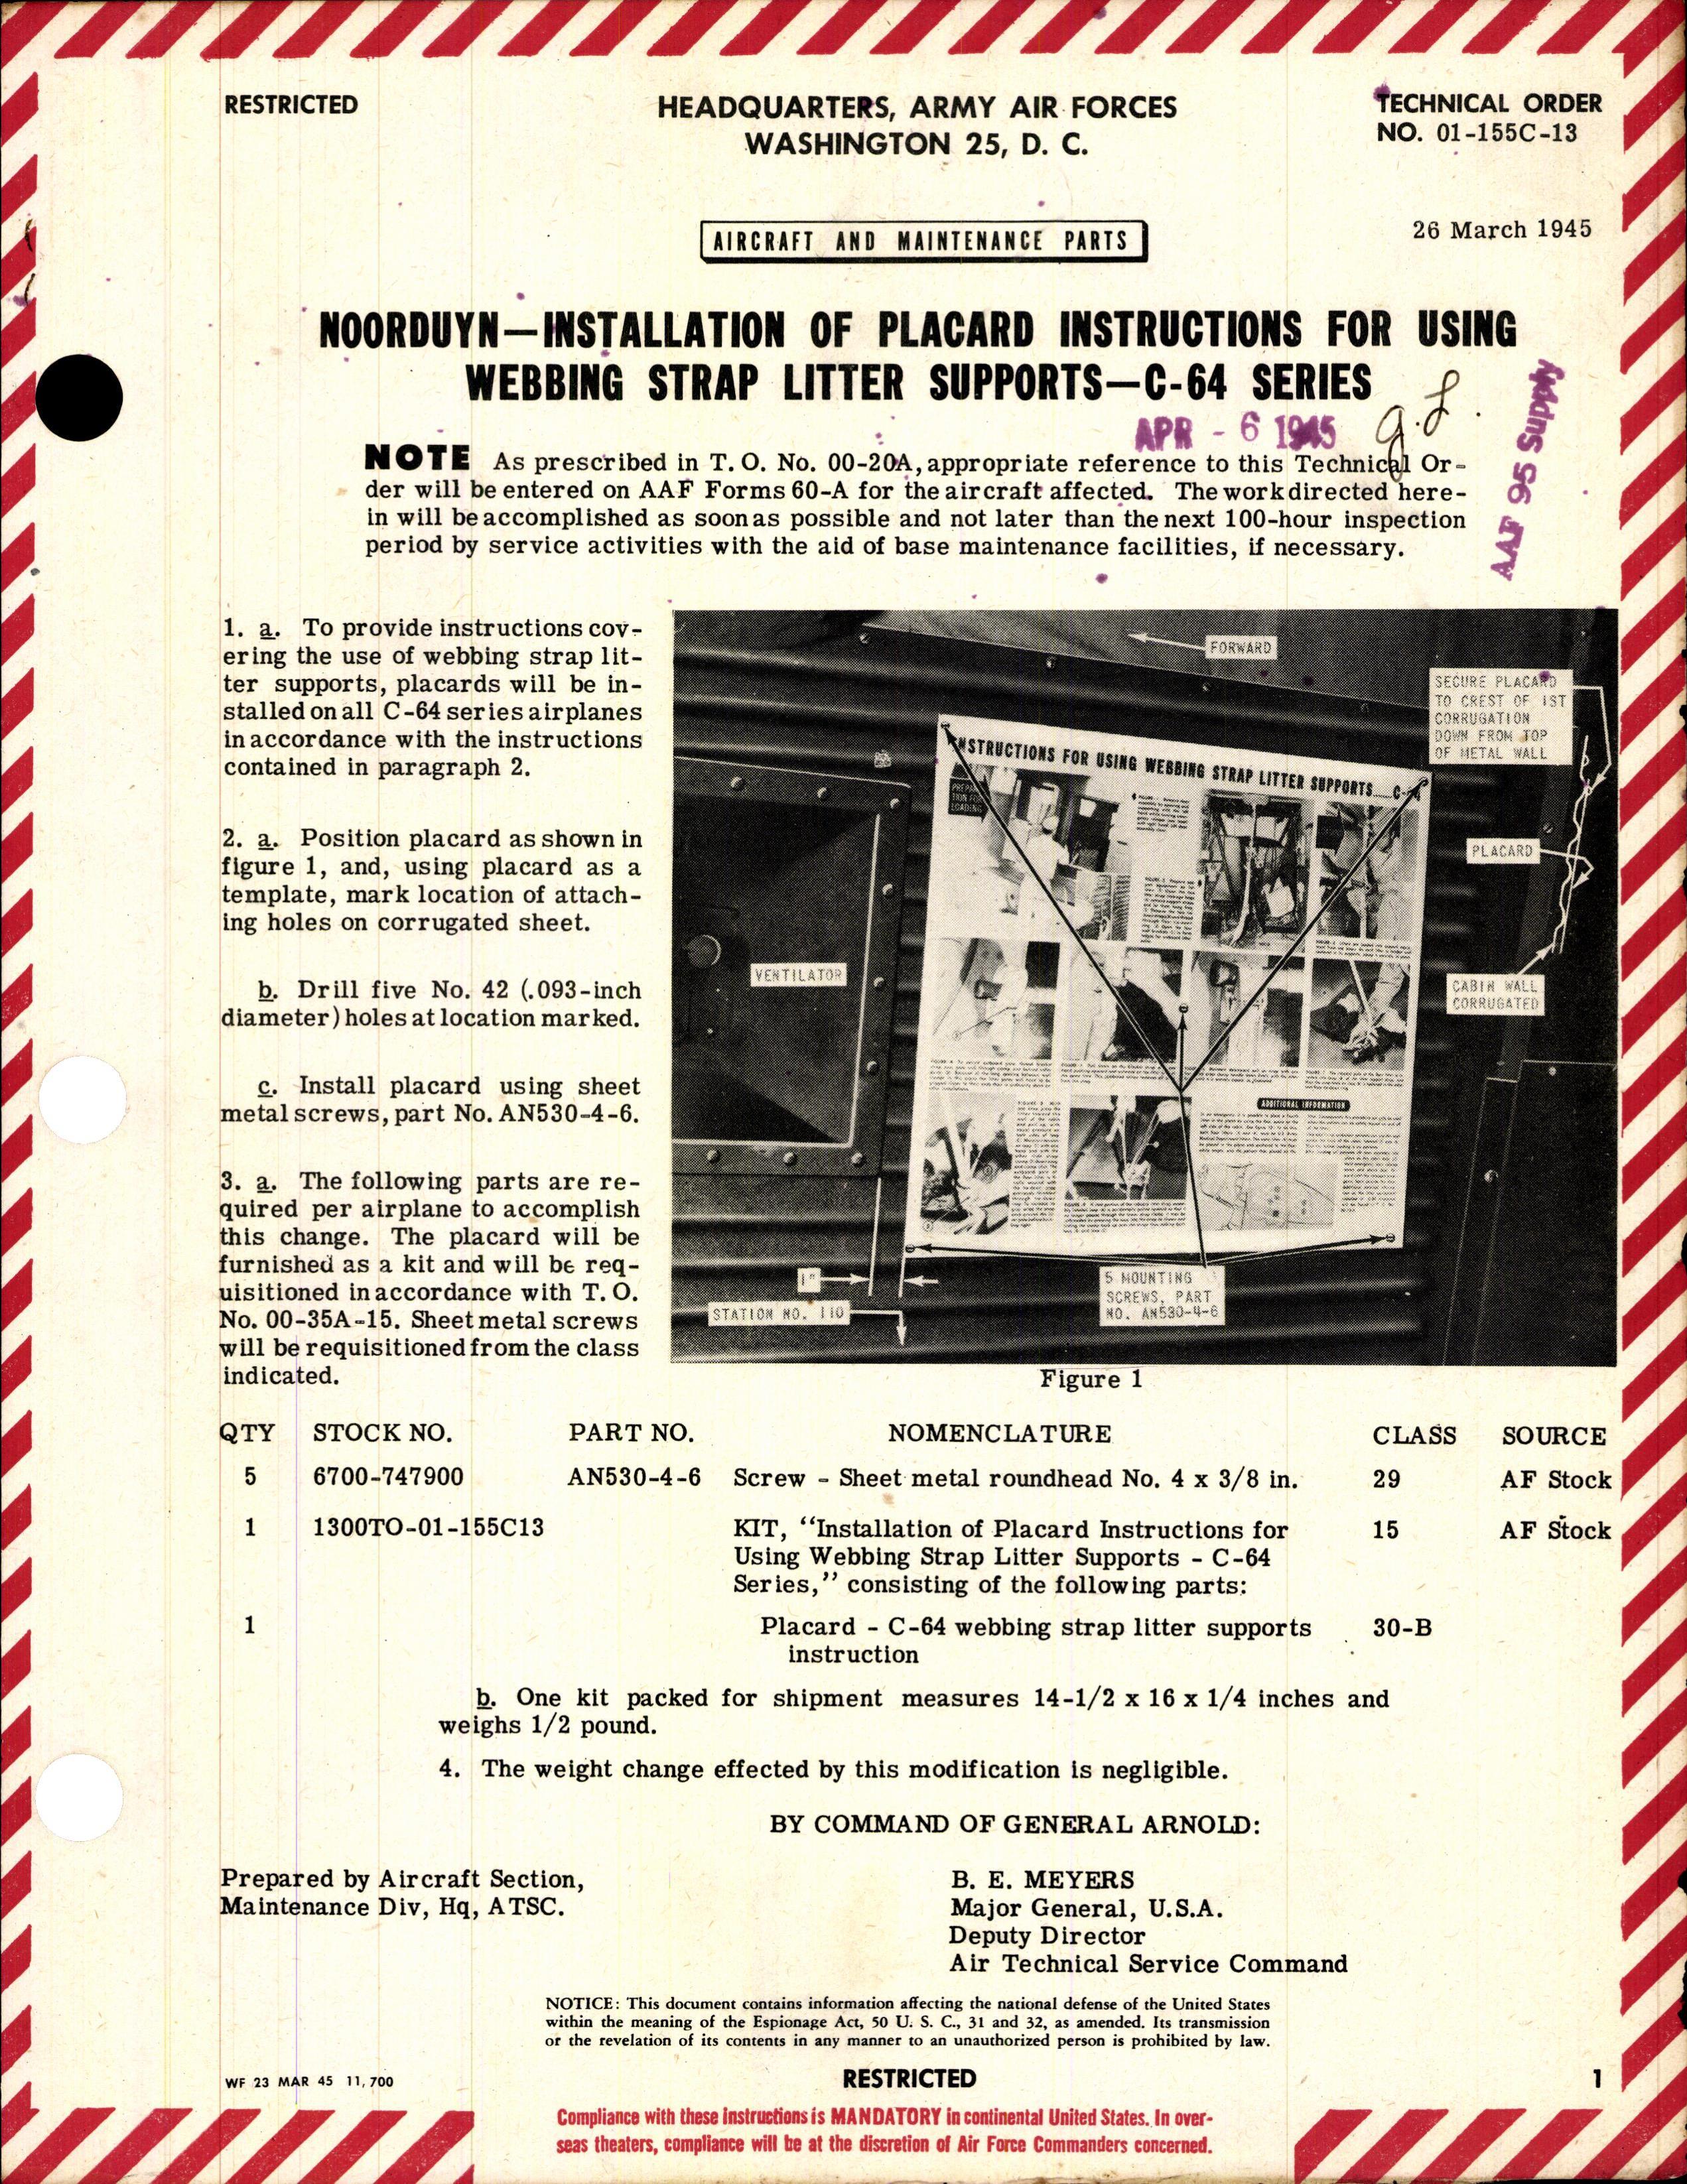 Sample page 1 from AirCorps Library document: Installation of Placard Instructions for Using Webbing Strap Litter Supports